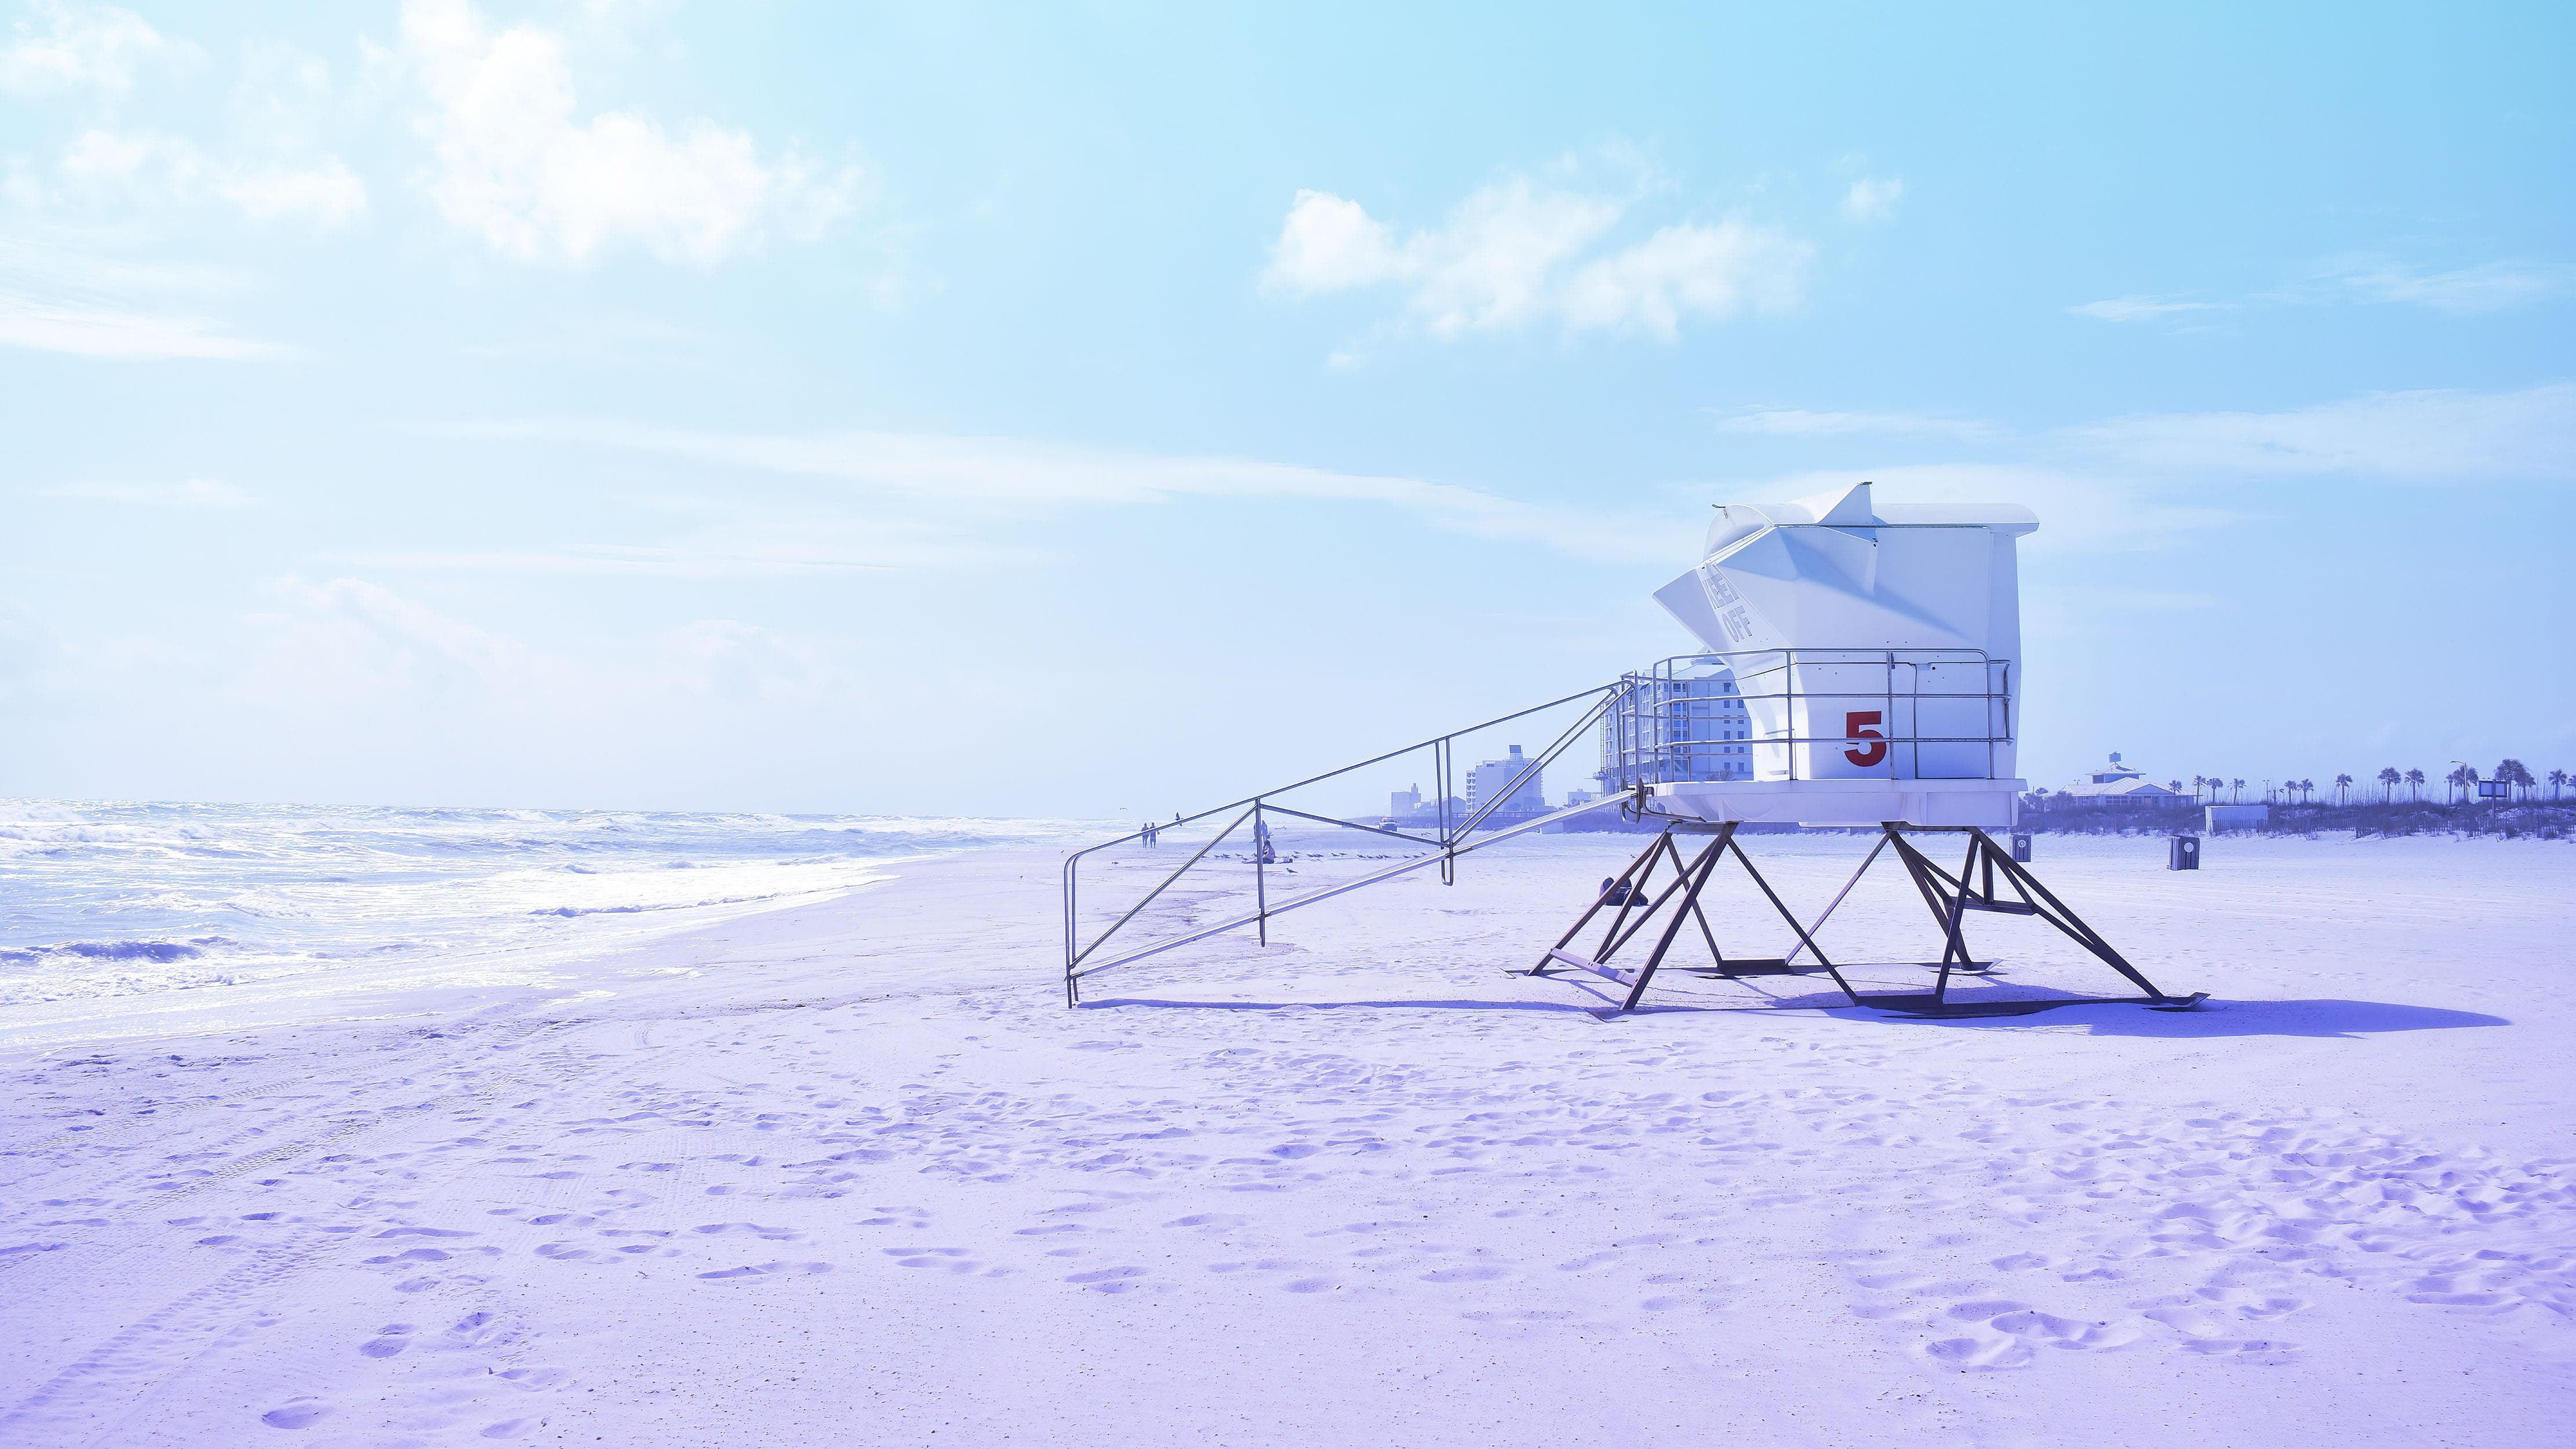 Wallpaper ID: 205700 / lifeguard hut on the sand beach in miami on a day  with storm clouds, lifeguarded 4k wallpaper free download